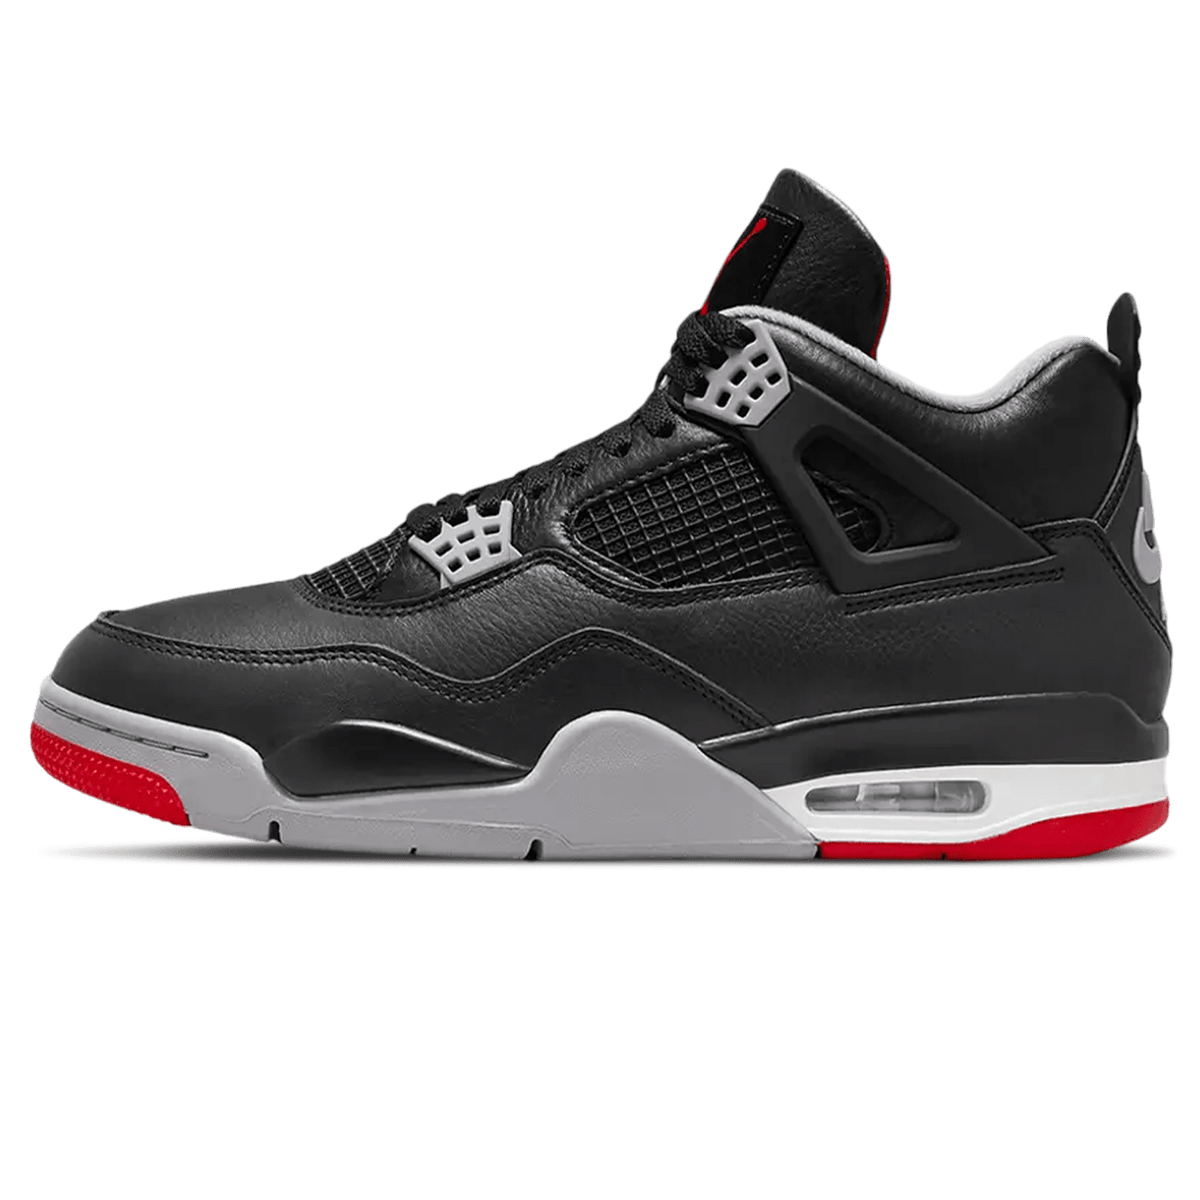 Craft collection will expand beyond the Air midnight Jordan 2 and Air midnight Jordan 4 in 2023 Retro 'Bred Reimagined' - UrlfreezeShops